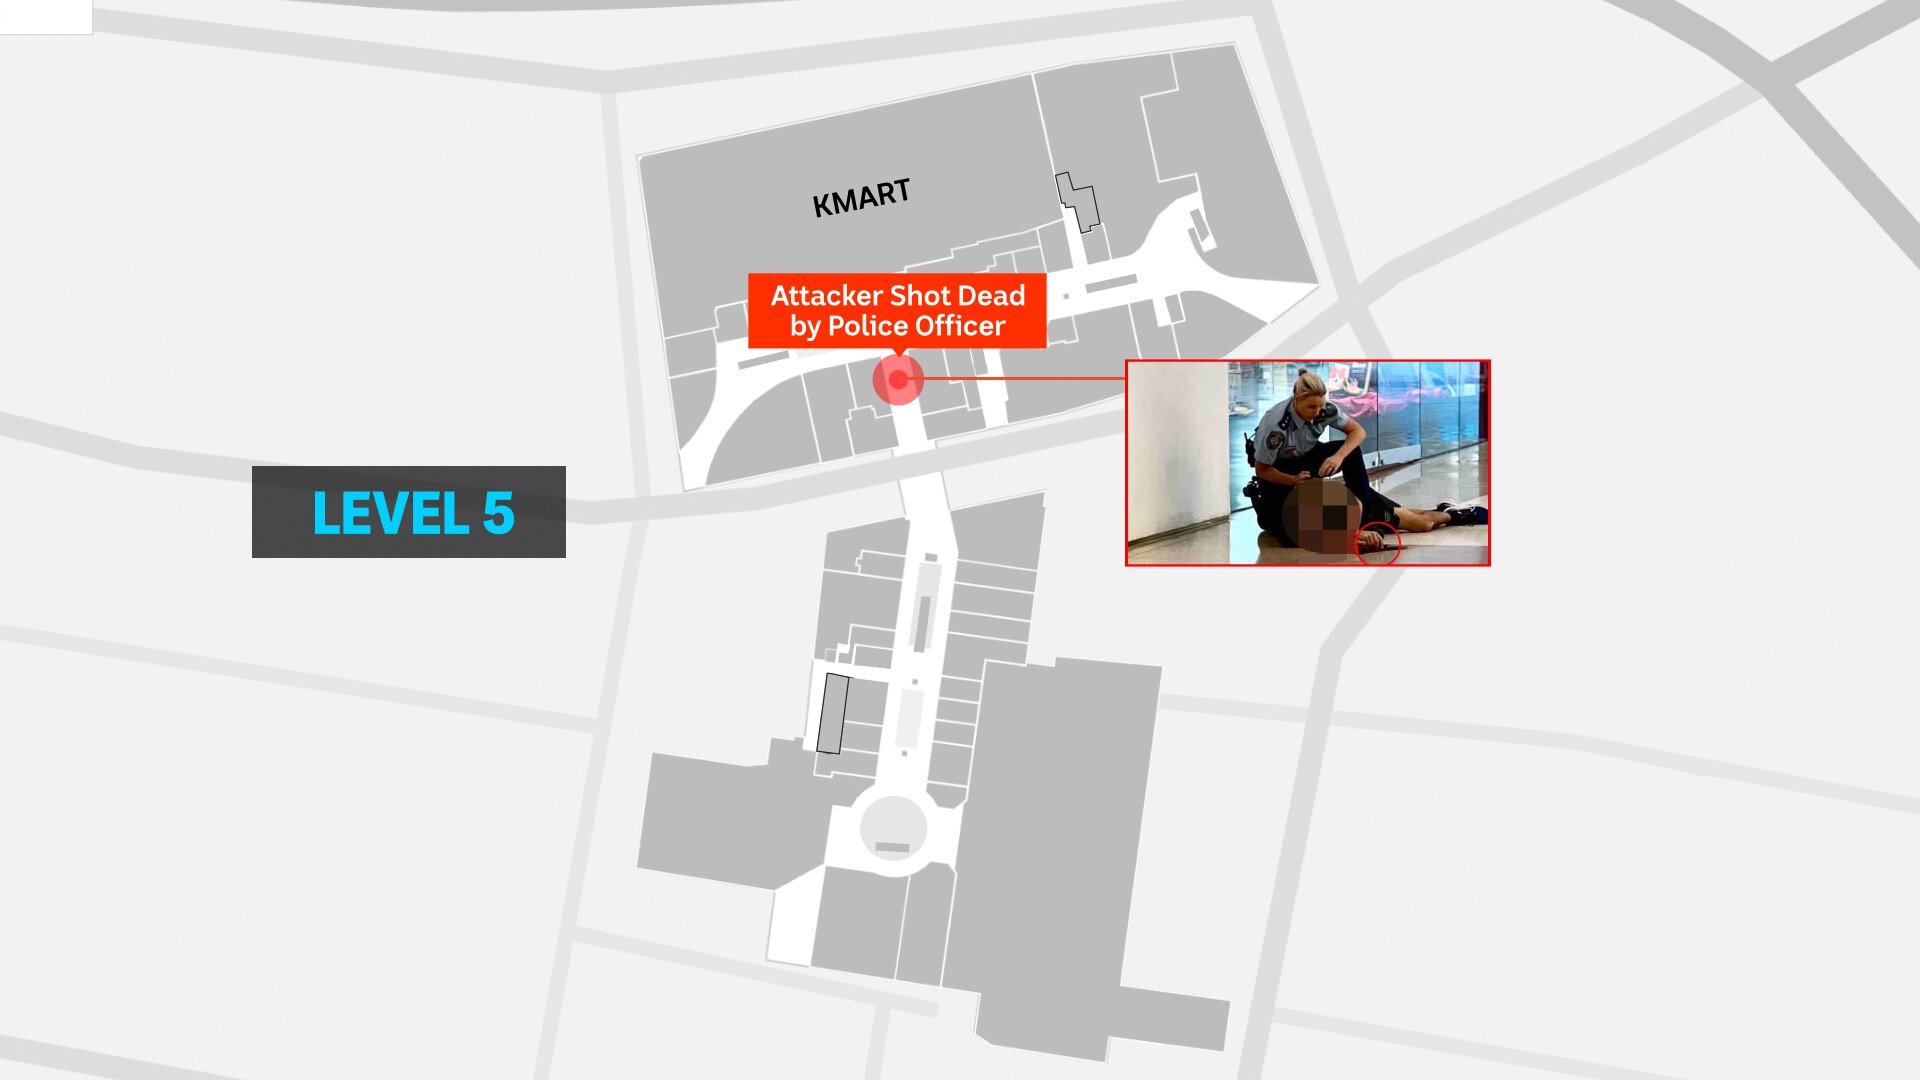 Map inside Westfield Bondi Junction showing where armed man was killed, inset images shows policewoman over body